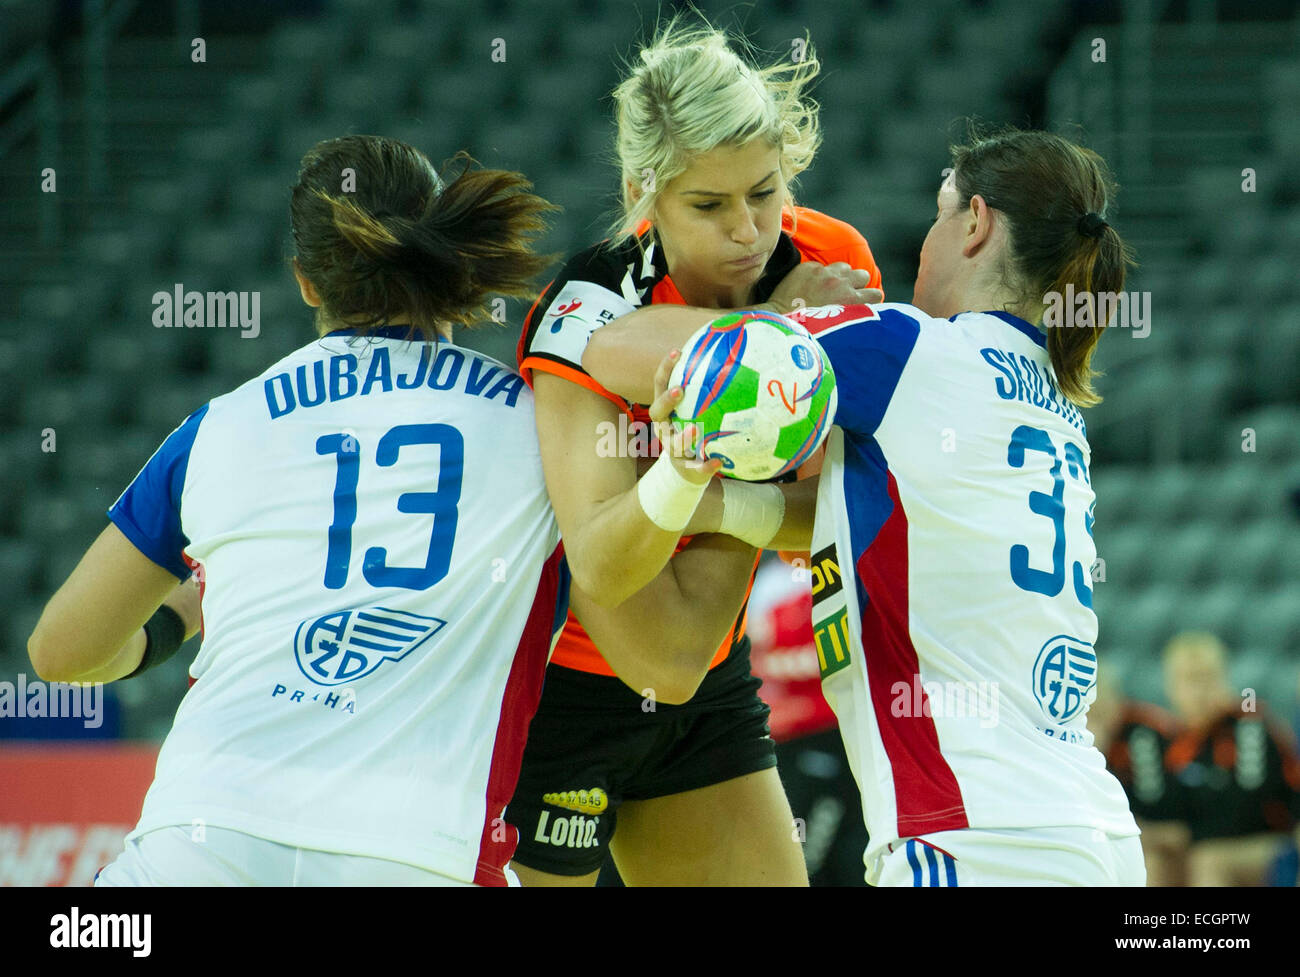 Zagreb, Croatia. 14th Dec, 2014. Estavana Polman (C) of the Netherlands is tackled by two players of Slovakia during the Women's EHF EURO 2014 handball match at the Arena Zagreb in Zagreb, Croatia, December 14, 2014. The Netherlands won 29-26. © Miso Lisanin/Xinhua/Alamy Live News Stock Photo